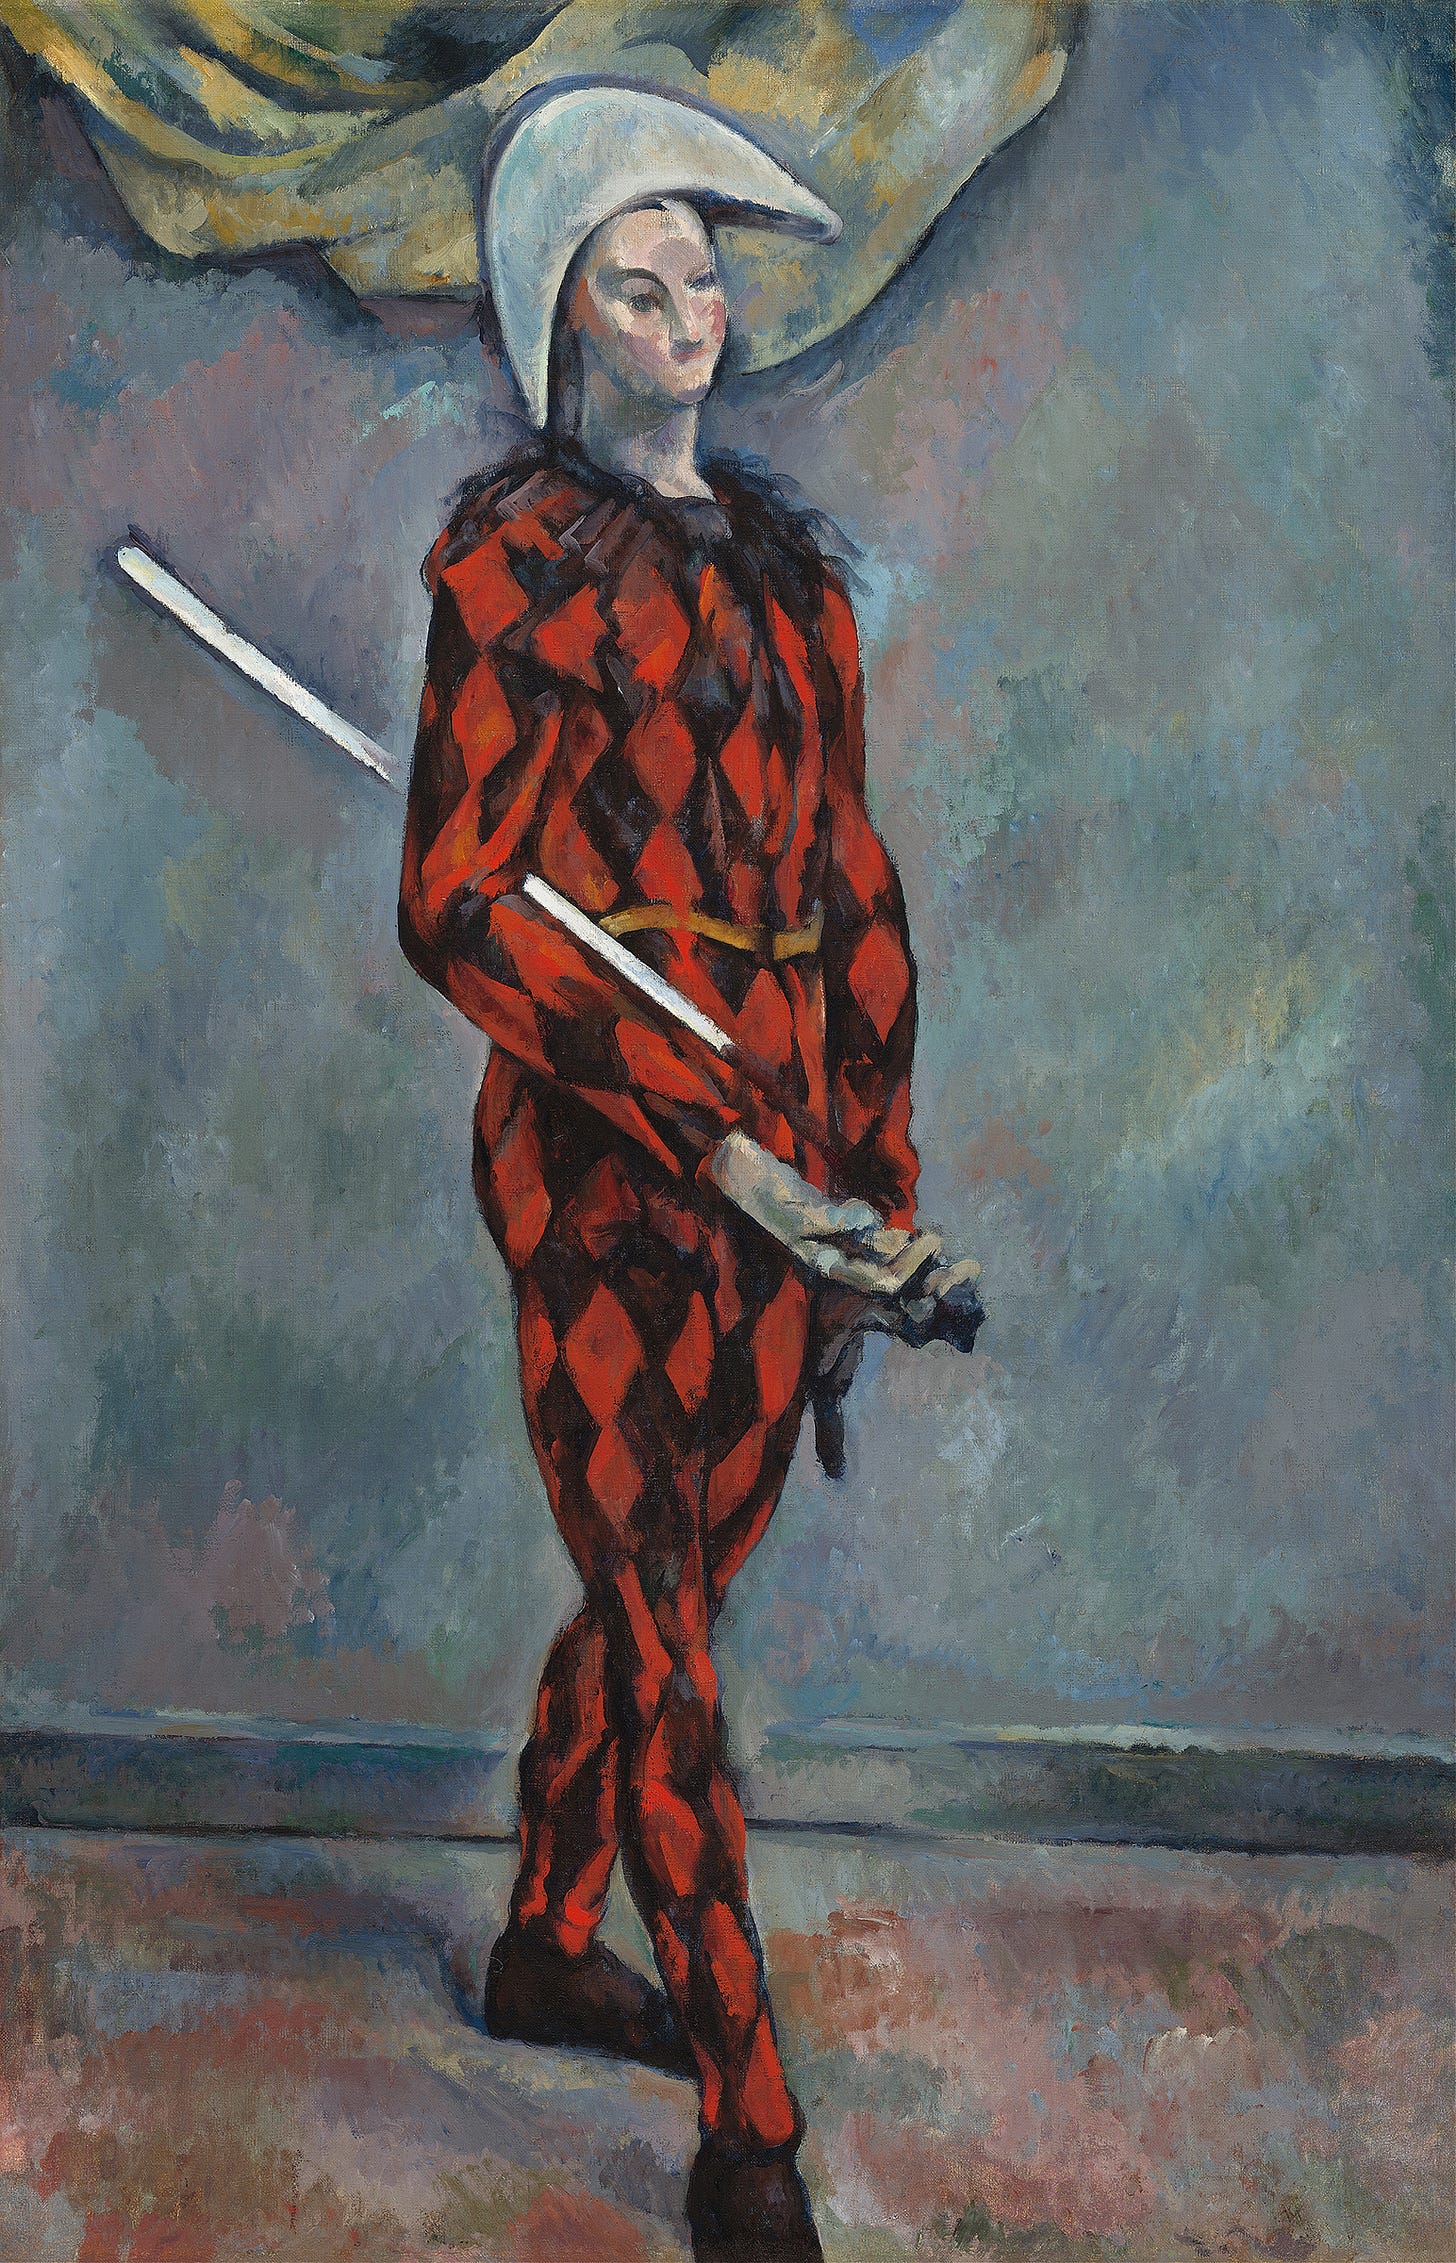 Harlequin (1888-1890)by Paul Cézanne